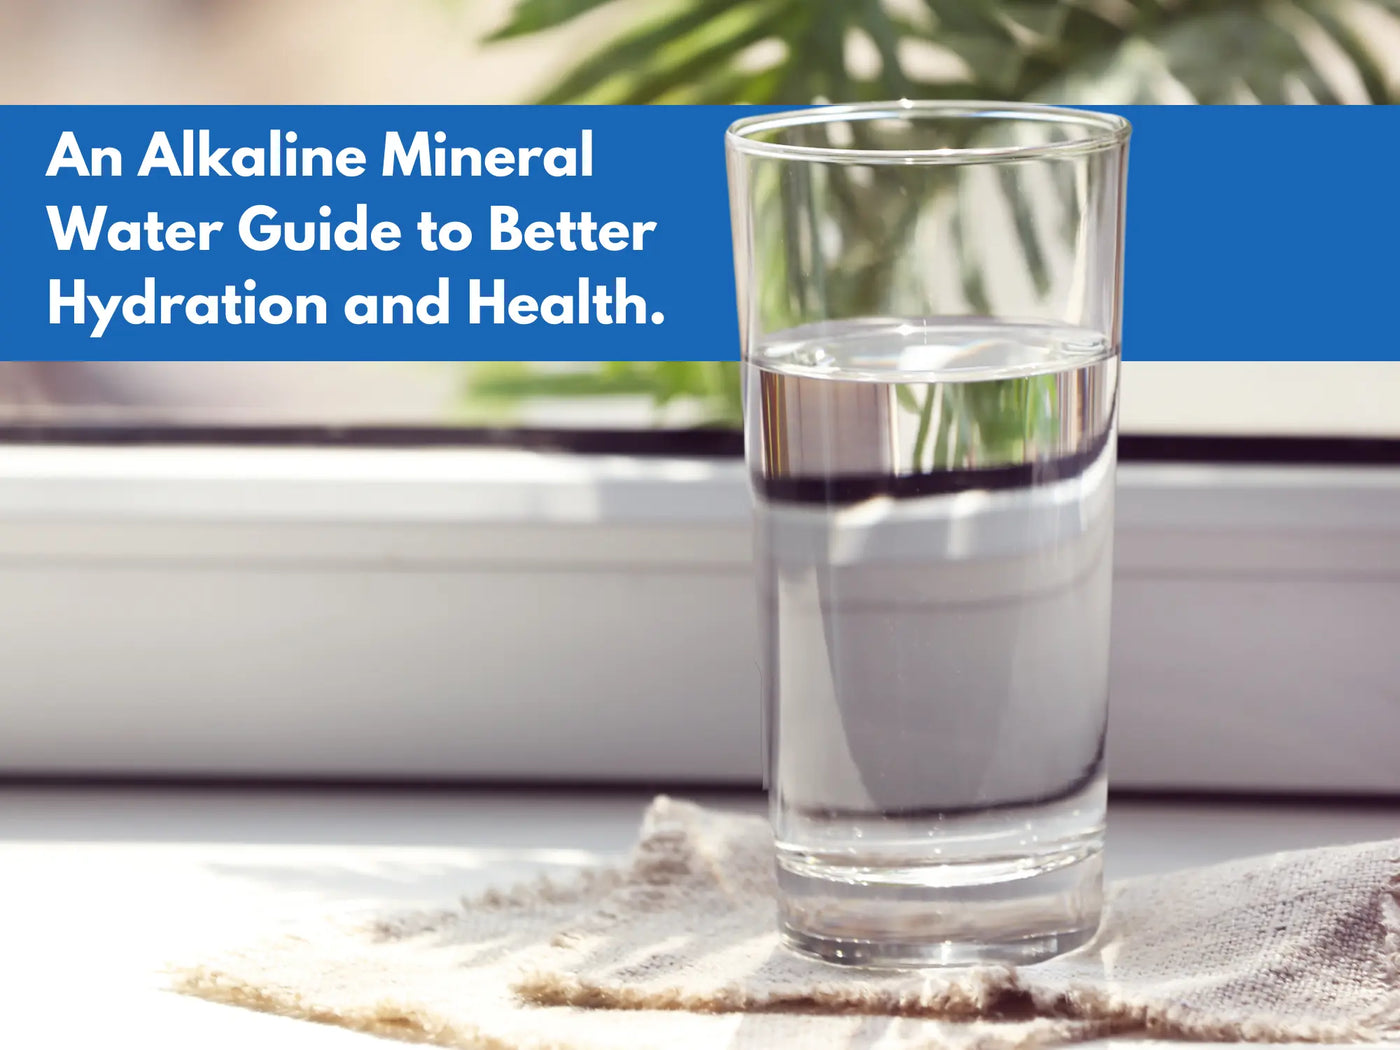 An Alkaline Mineral Water Guide to Better Hydration and Health